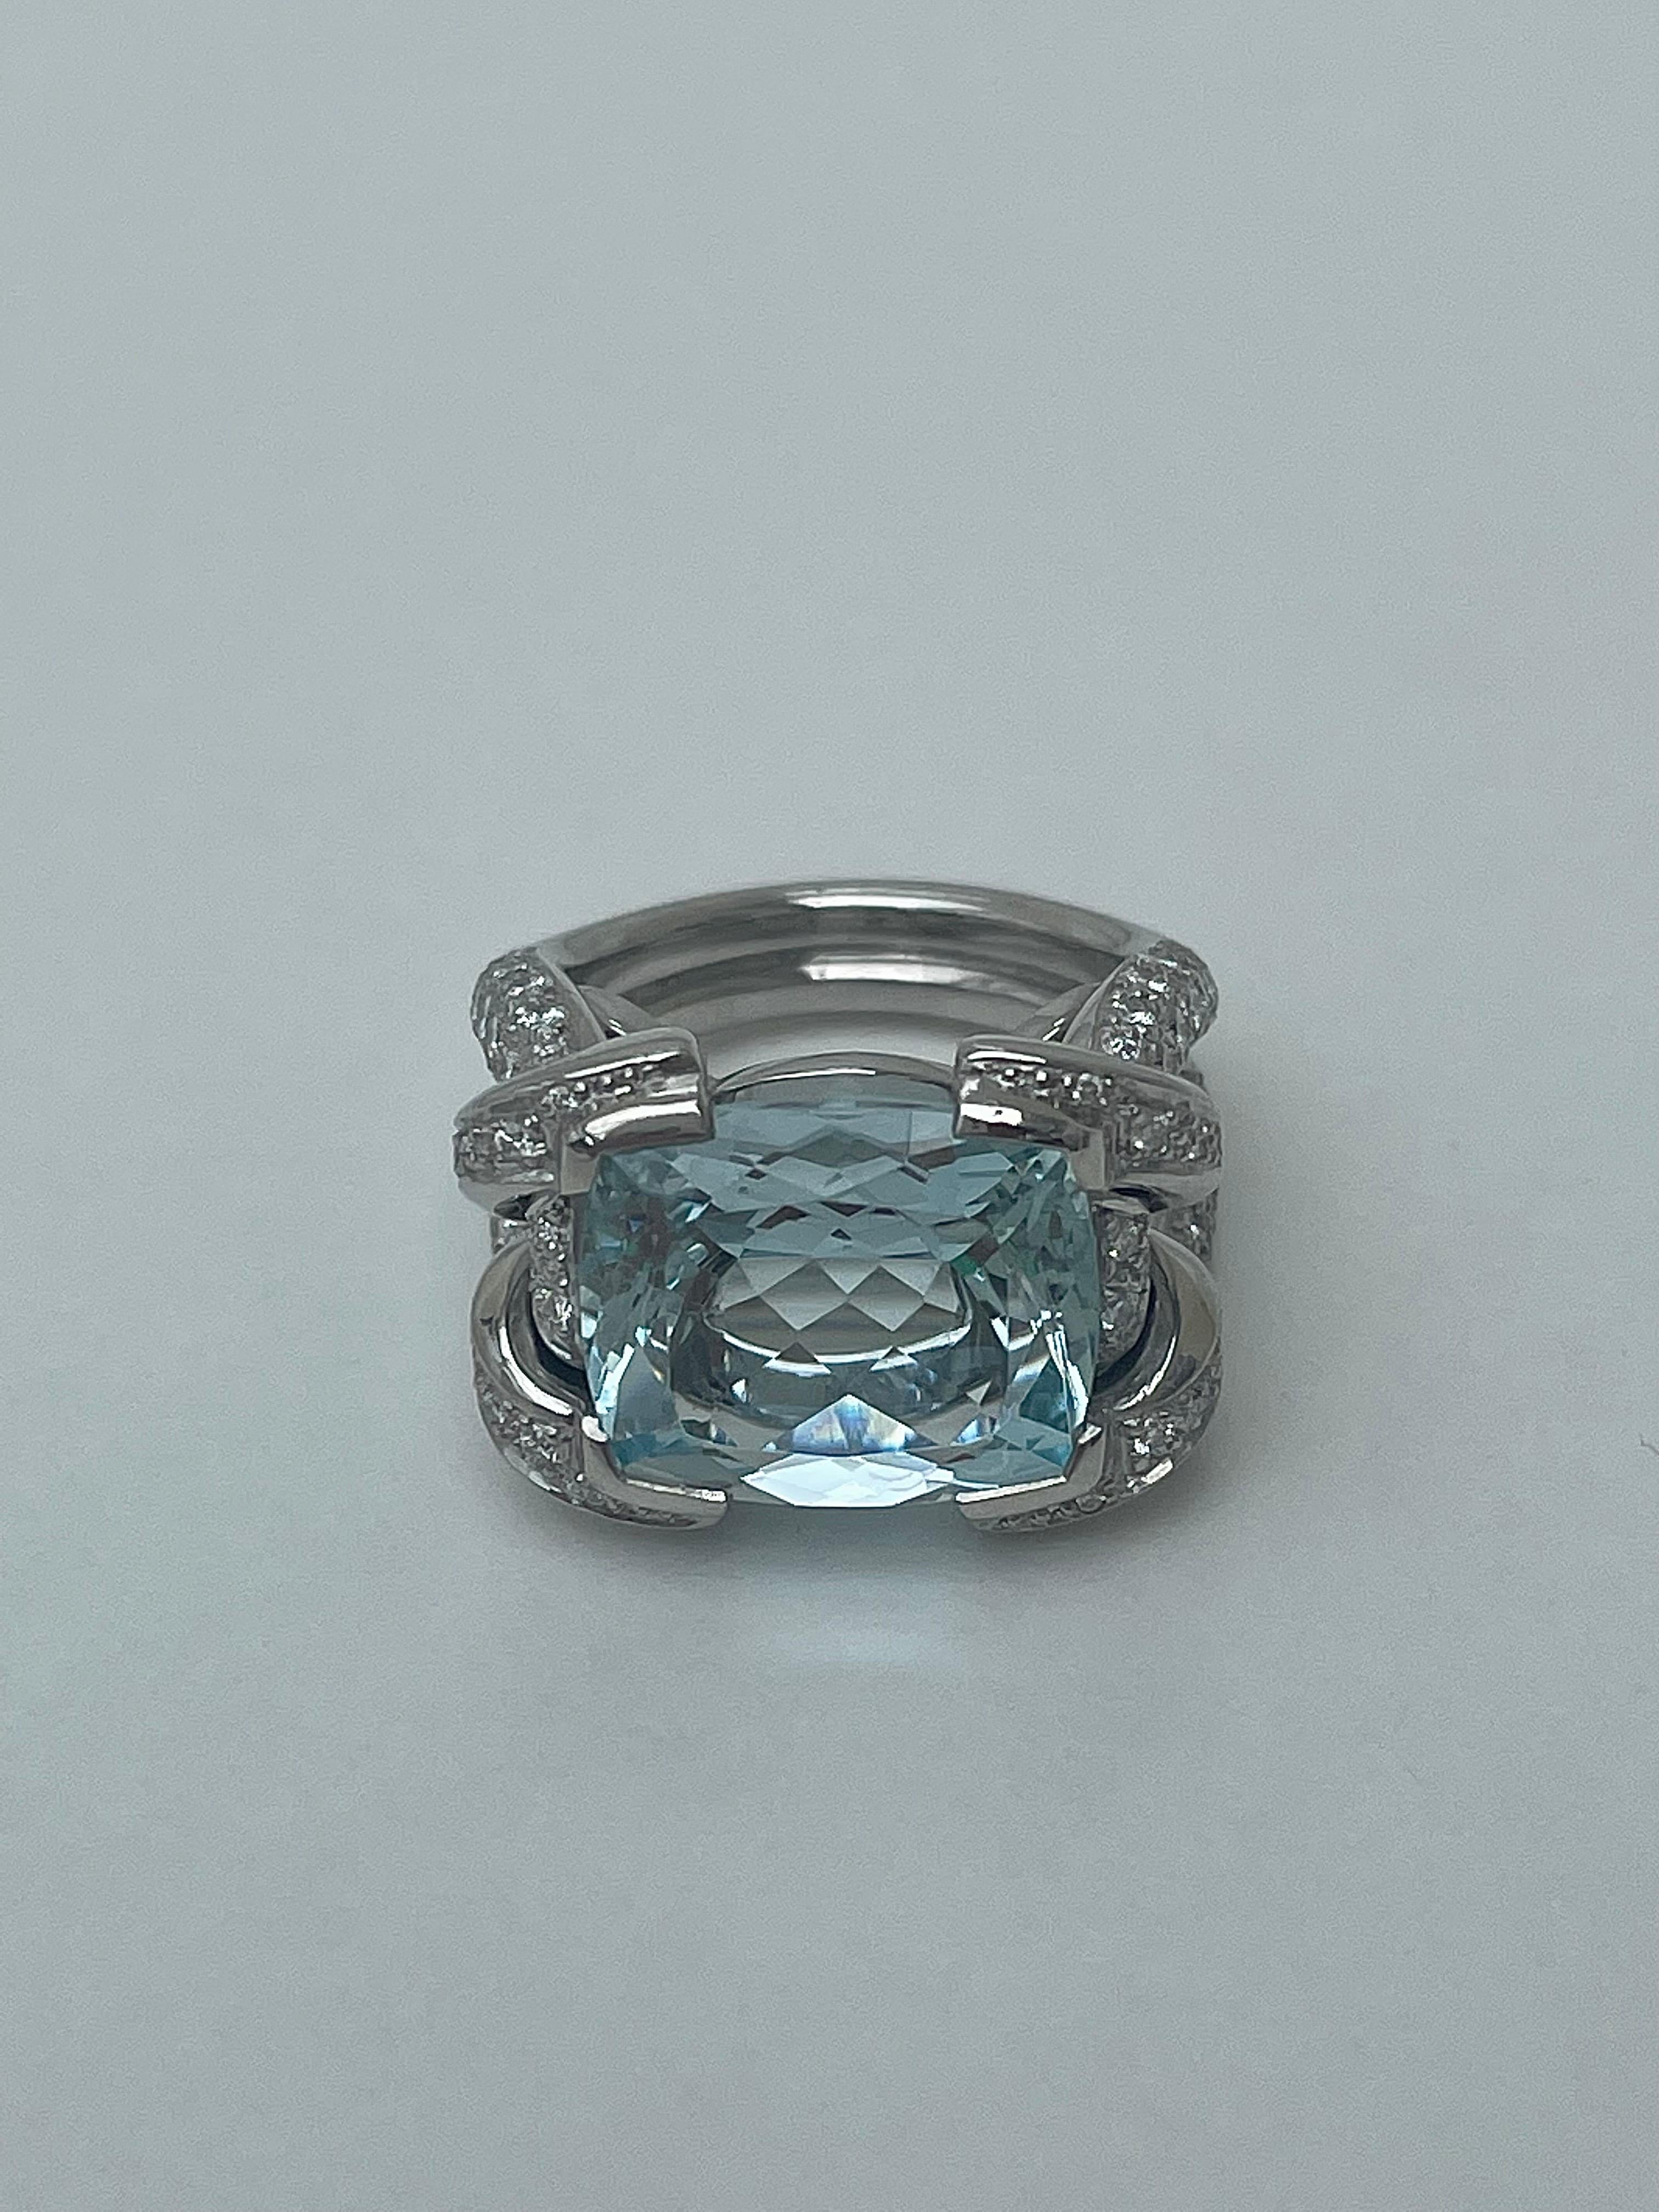 Vintage Heavy Platinum Aquamarine and Diamond Adorned Ring 

outstanding diamond spilt shoulders, with an incredible large aquamarine stone, perfect statement ring! 

Diamonds are of the highest quality. 

The item comes without the box in the